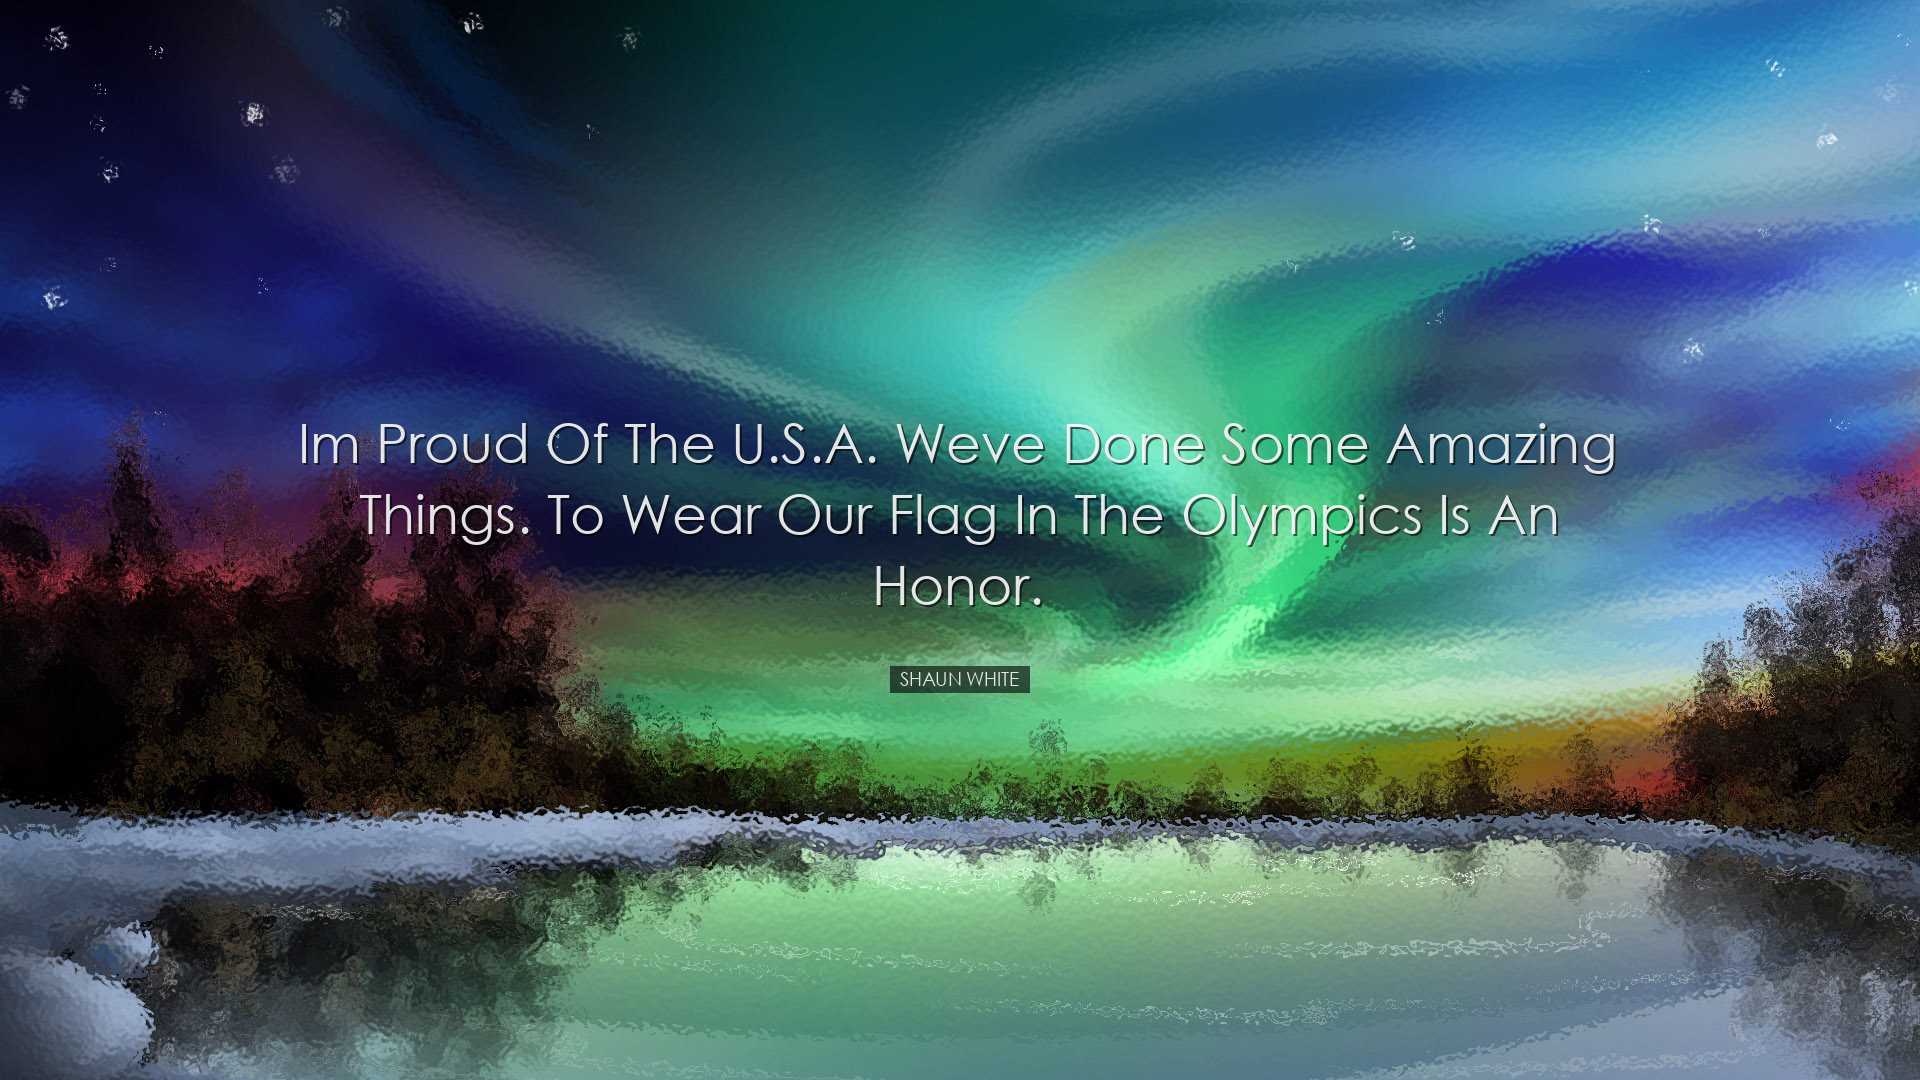 Im proud of the U.S.A. Weve done some amazing things. To wear our